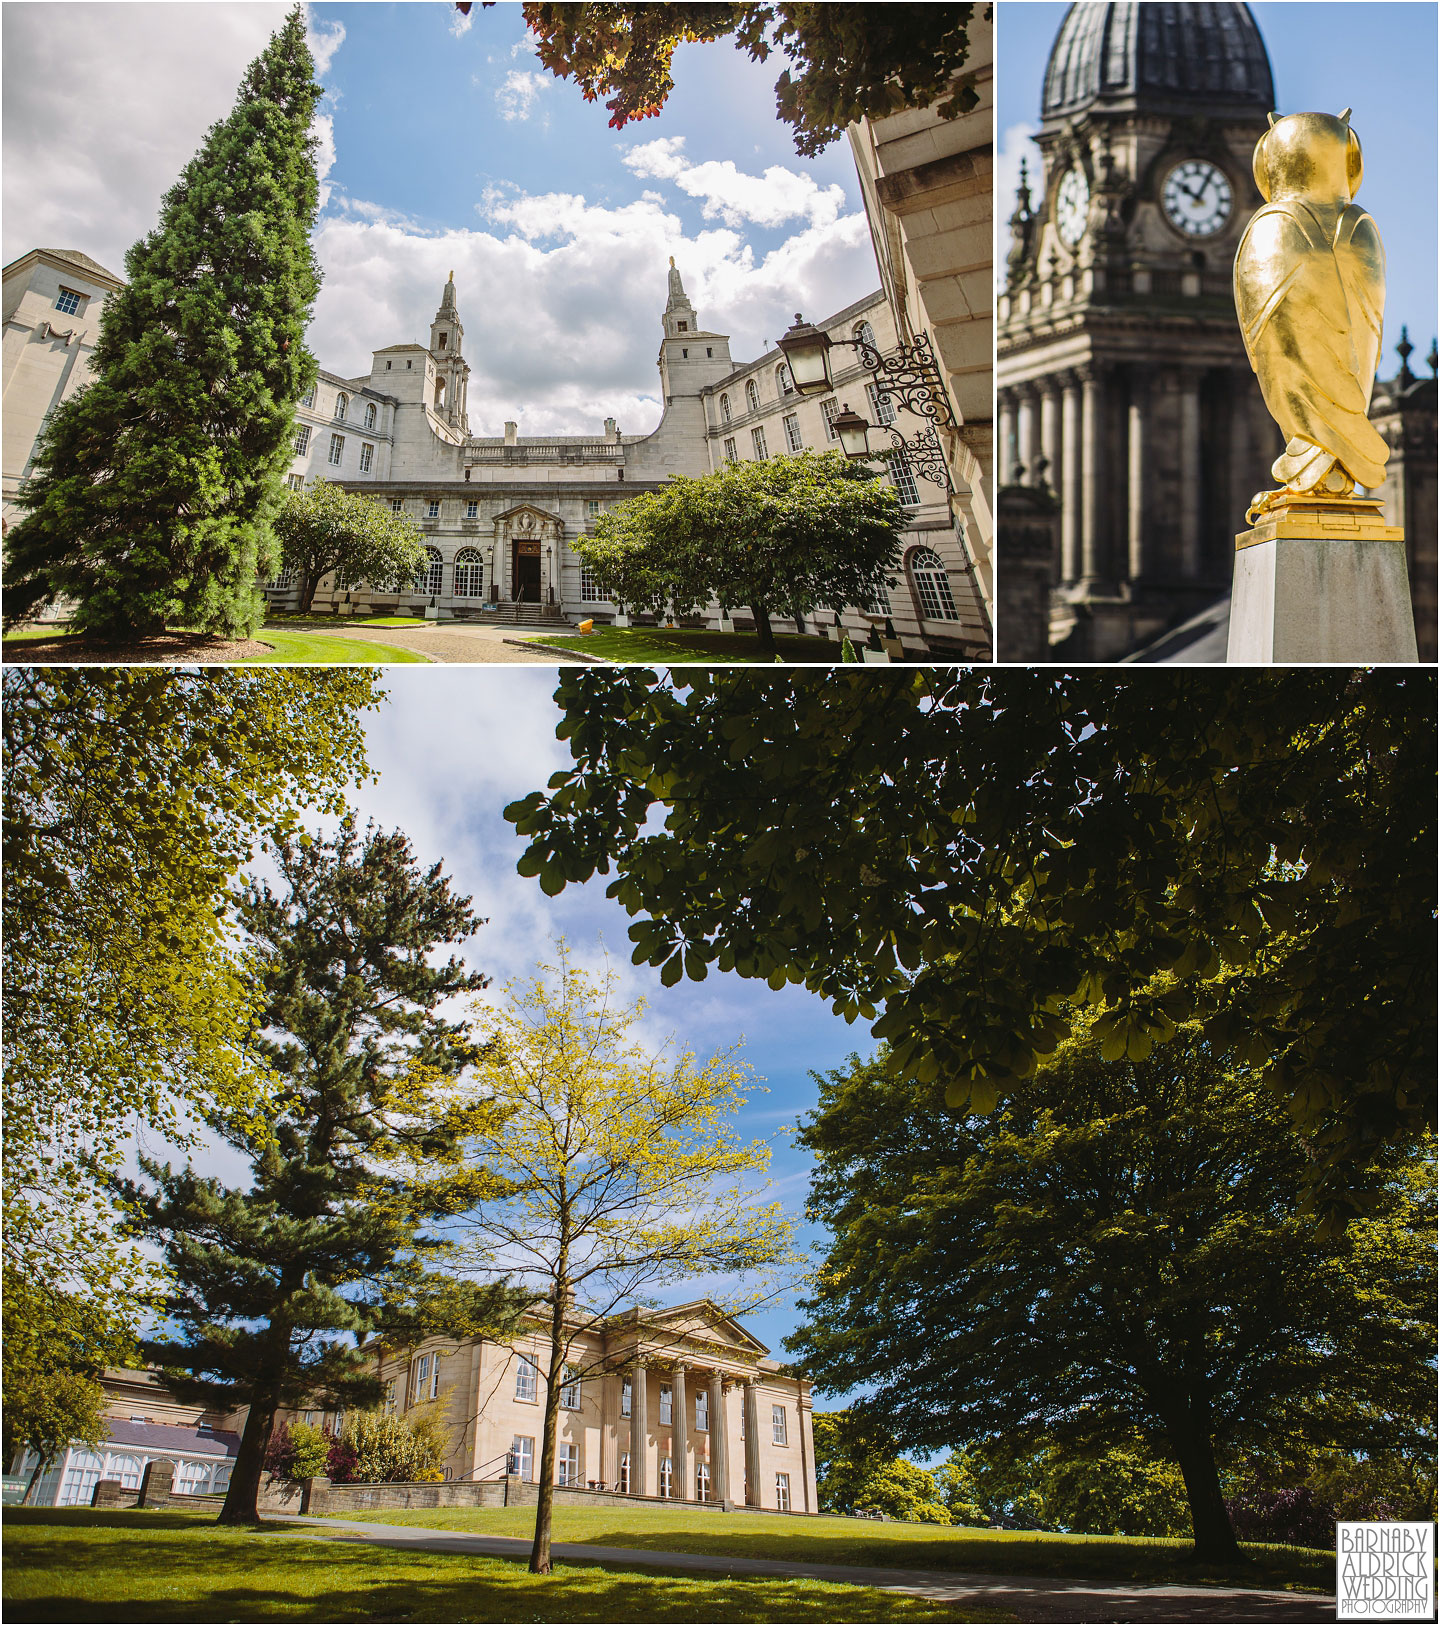 A photograph of Leeds city wedding venues including and Leeds Civic Hall Leeds Town Hall and The Mansion in Roundhay Park